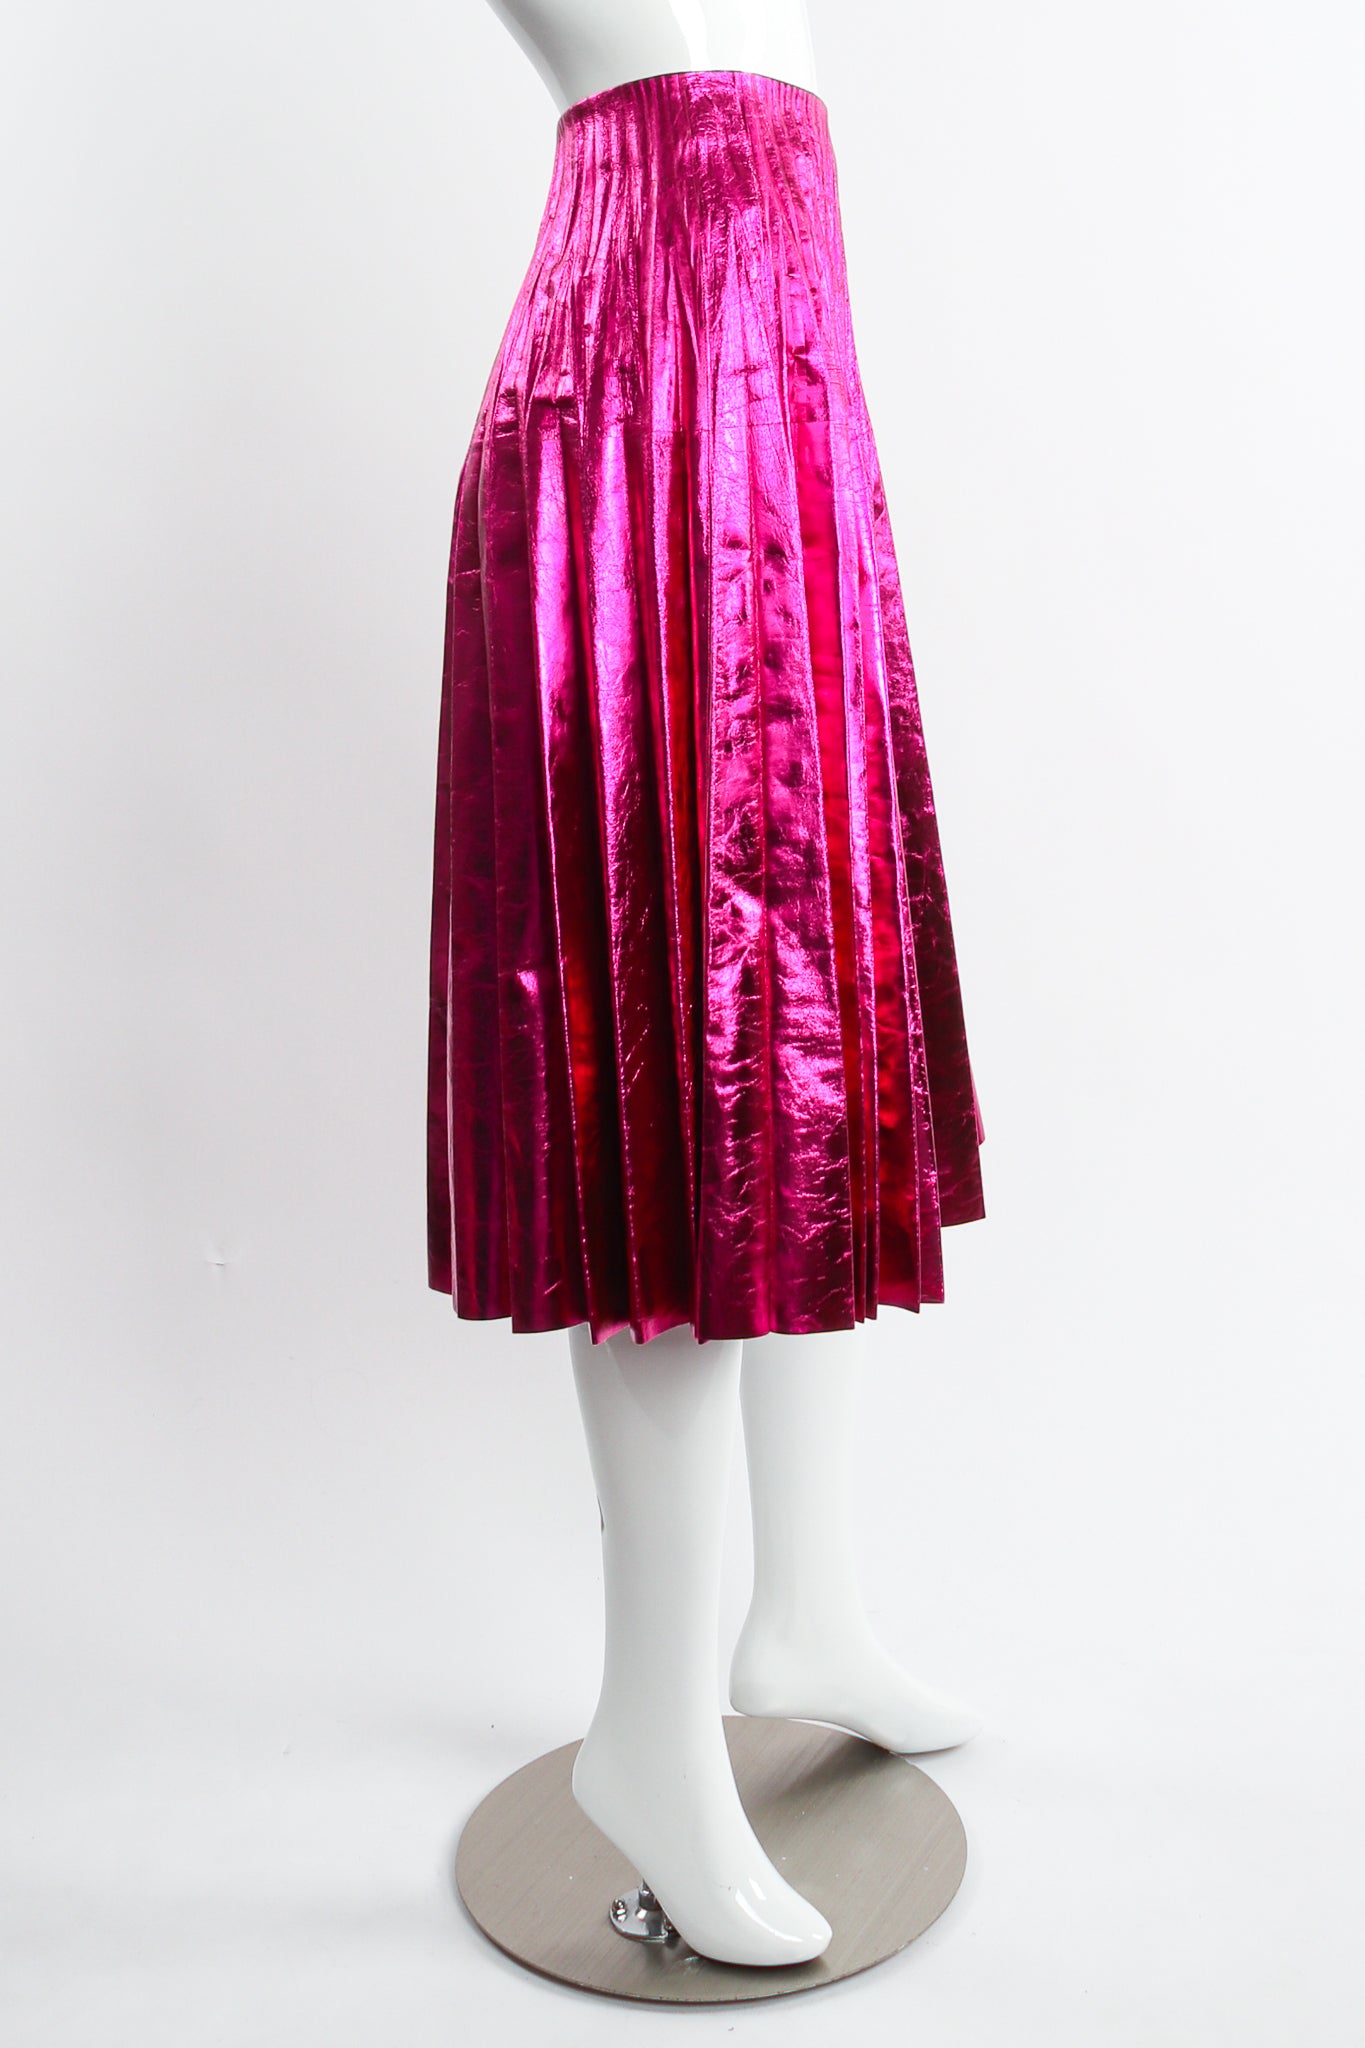 Gucci 2017 Metallic Plisse Pleated Leather Skirt in Fuchsia Rose on Mannequin side at Recess LA